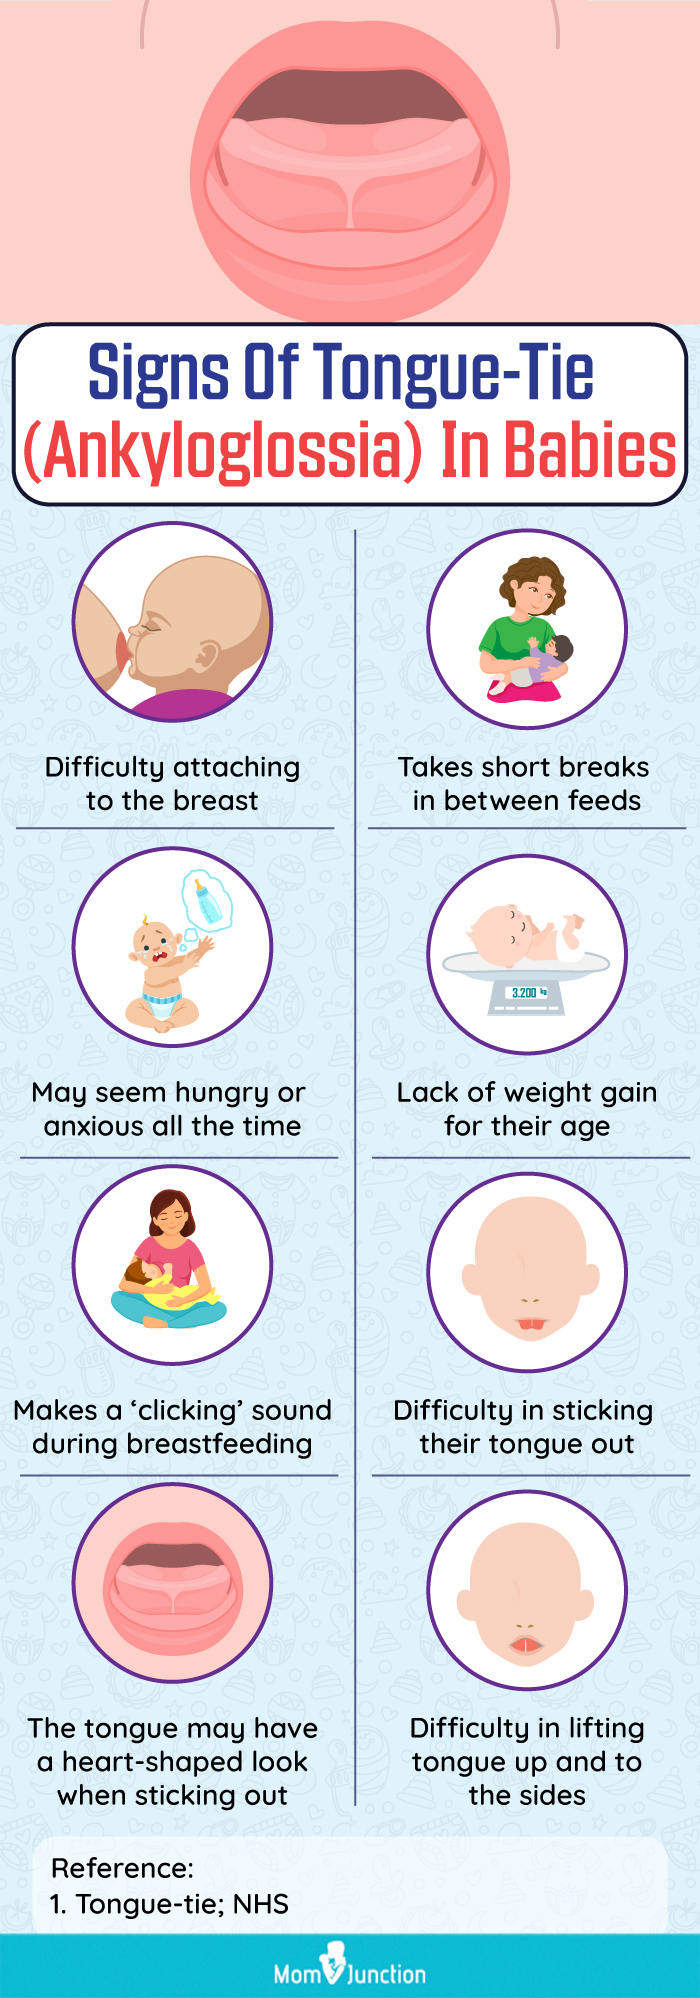 Signs Of Tongue Tie (Ankyloglossia) In Babies (infographic)